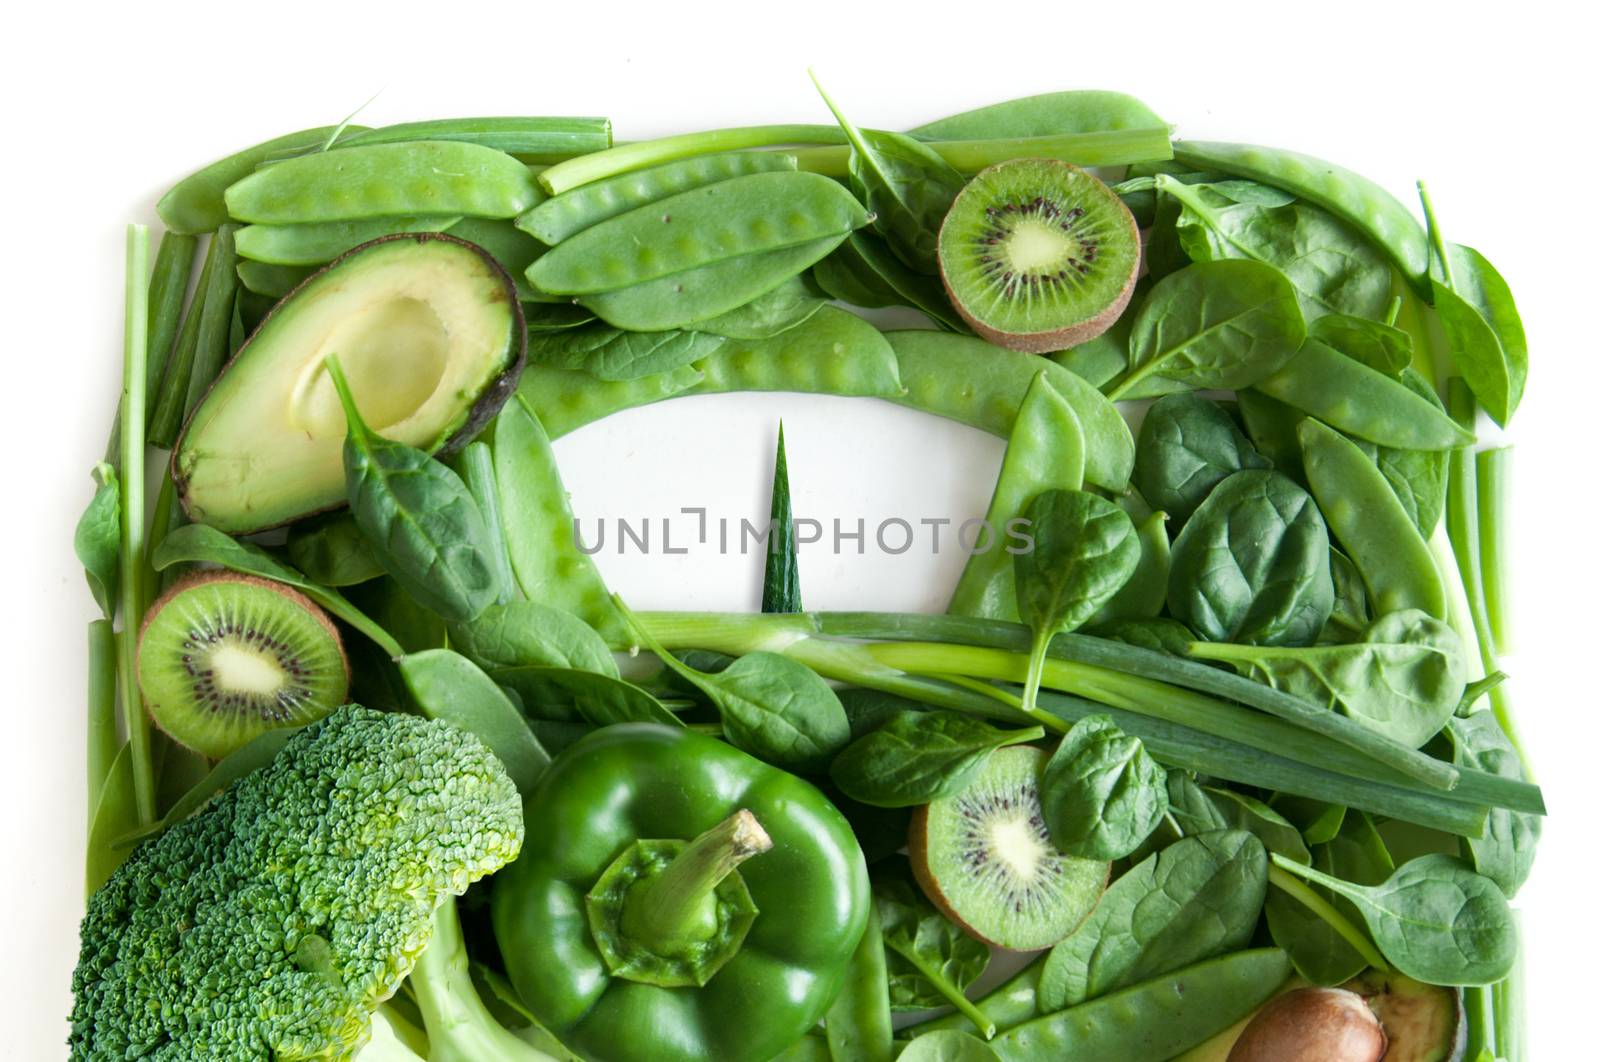 Green fruits and vegetables in the shape of bathroom weighing scales over a white background